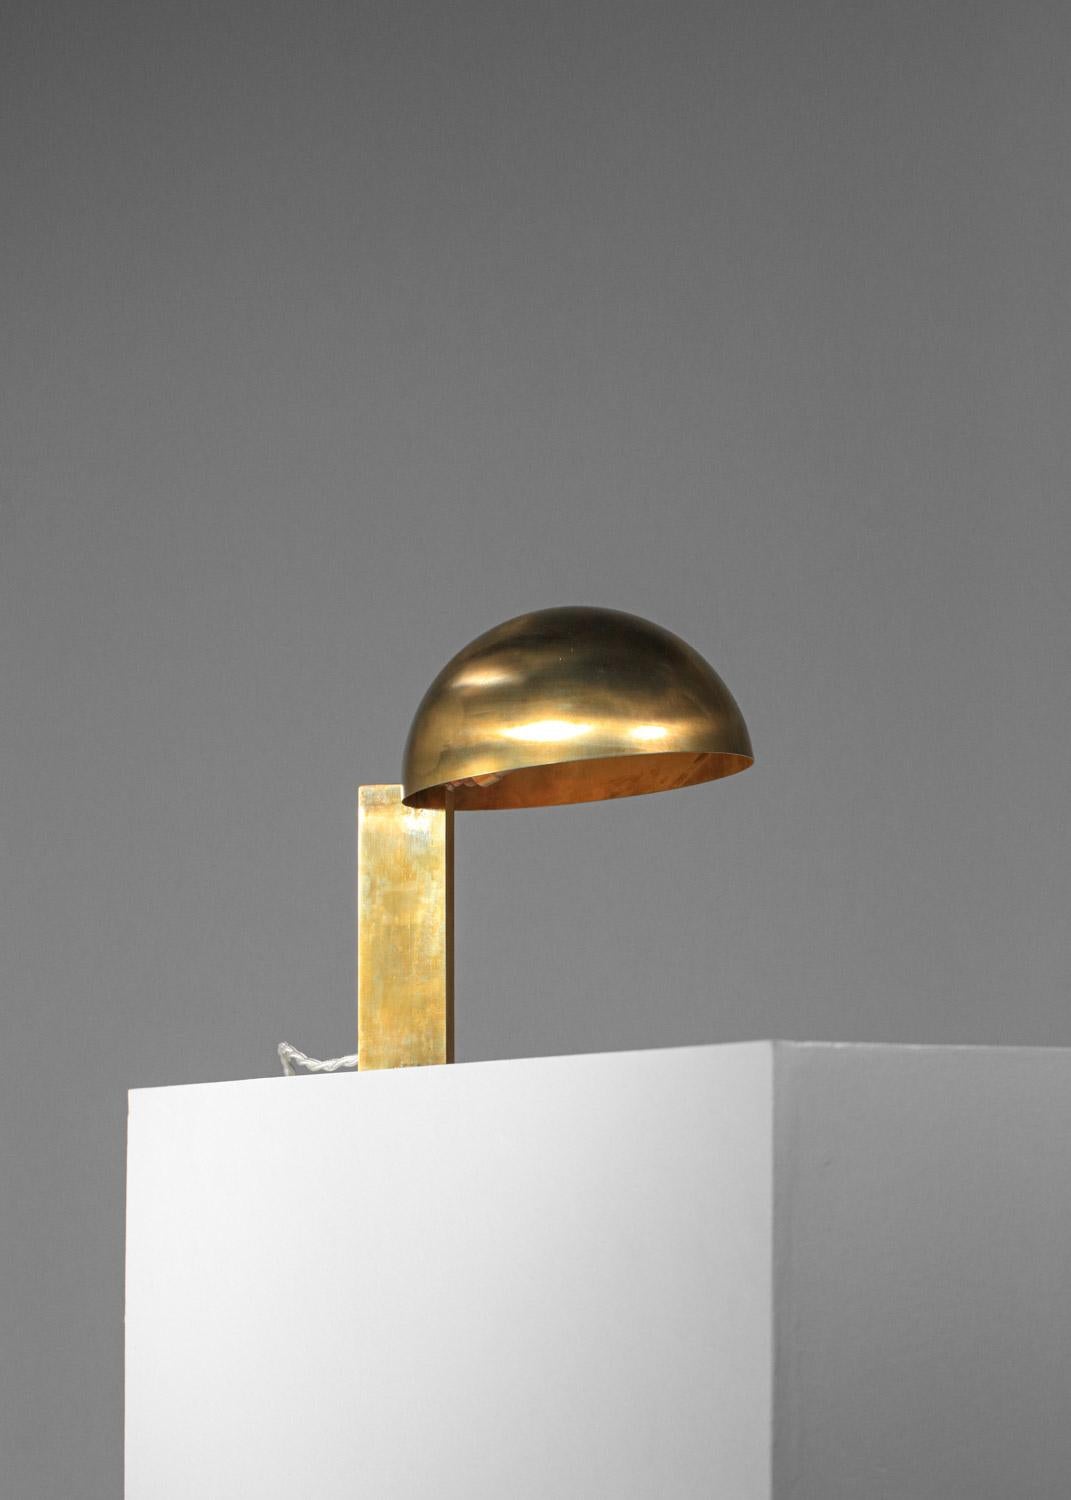 
We're delighted to present the very first modern lamp. Particular attention has been paid to the details of the finish and the patina of the brass. This lamp is made entirely of solid brass with our own patina. We recommend one E14 LED bulb per